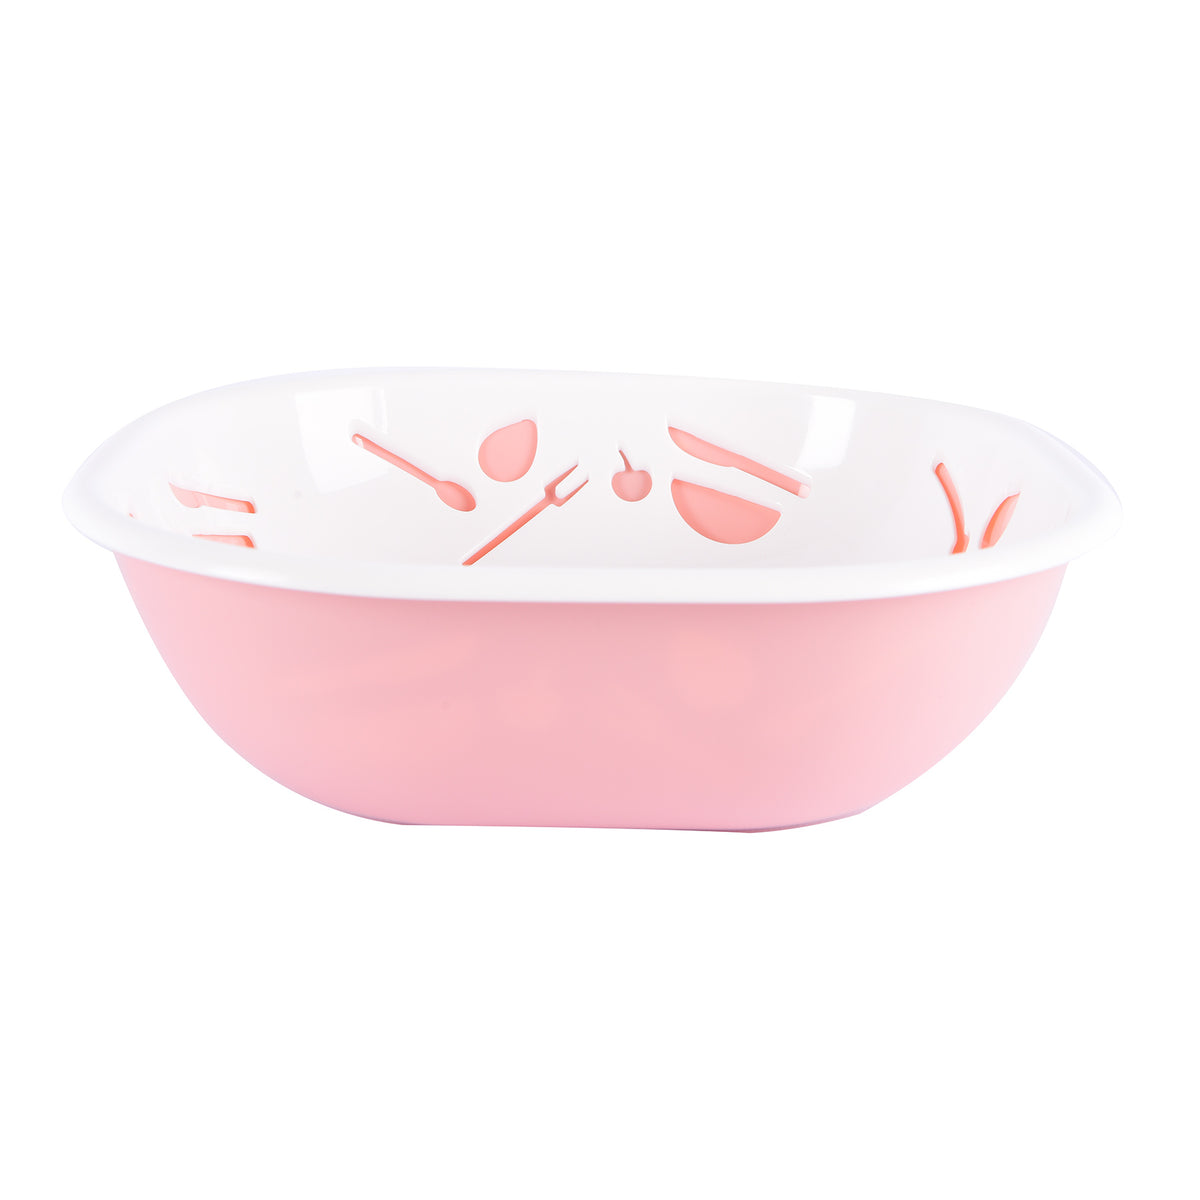 Drain basket small - pink Color